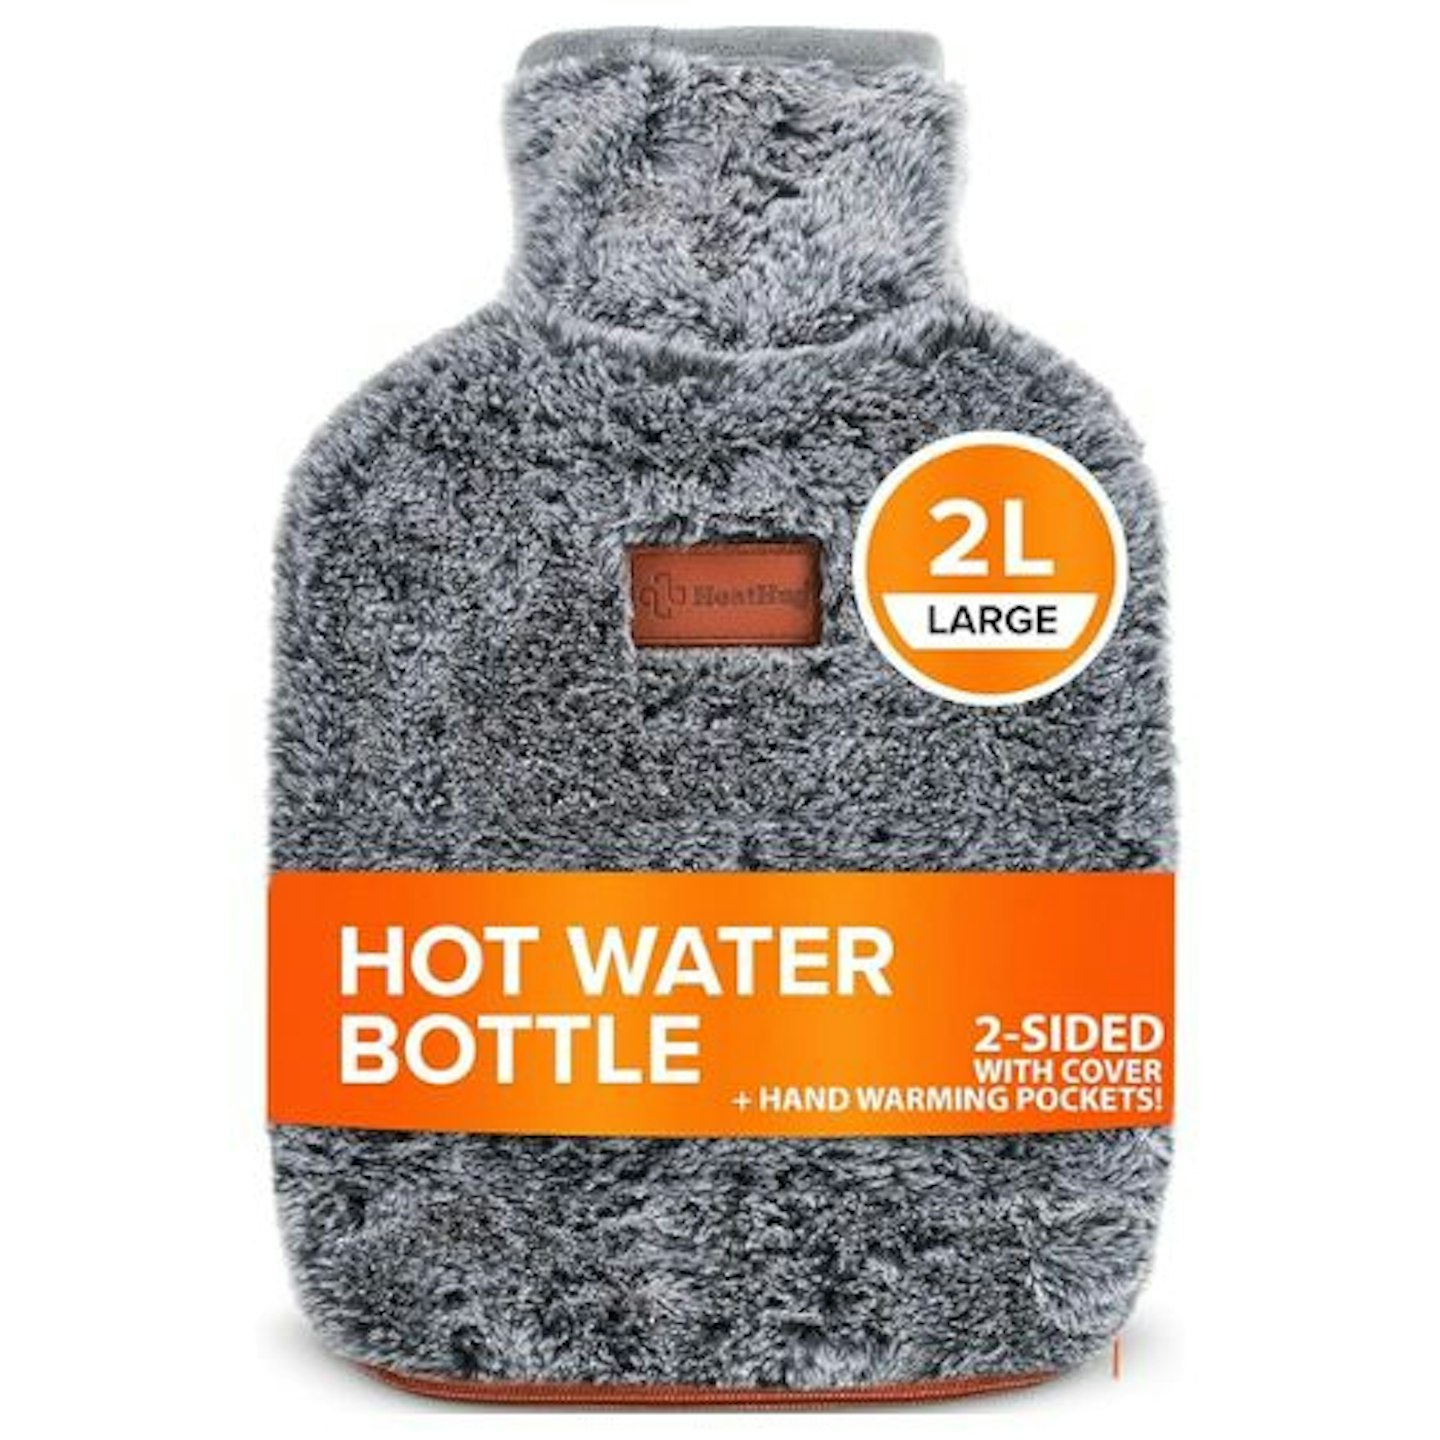 Hot Water Bottle with Cover UK - for Pain Relief